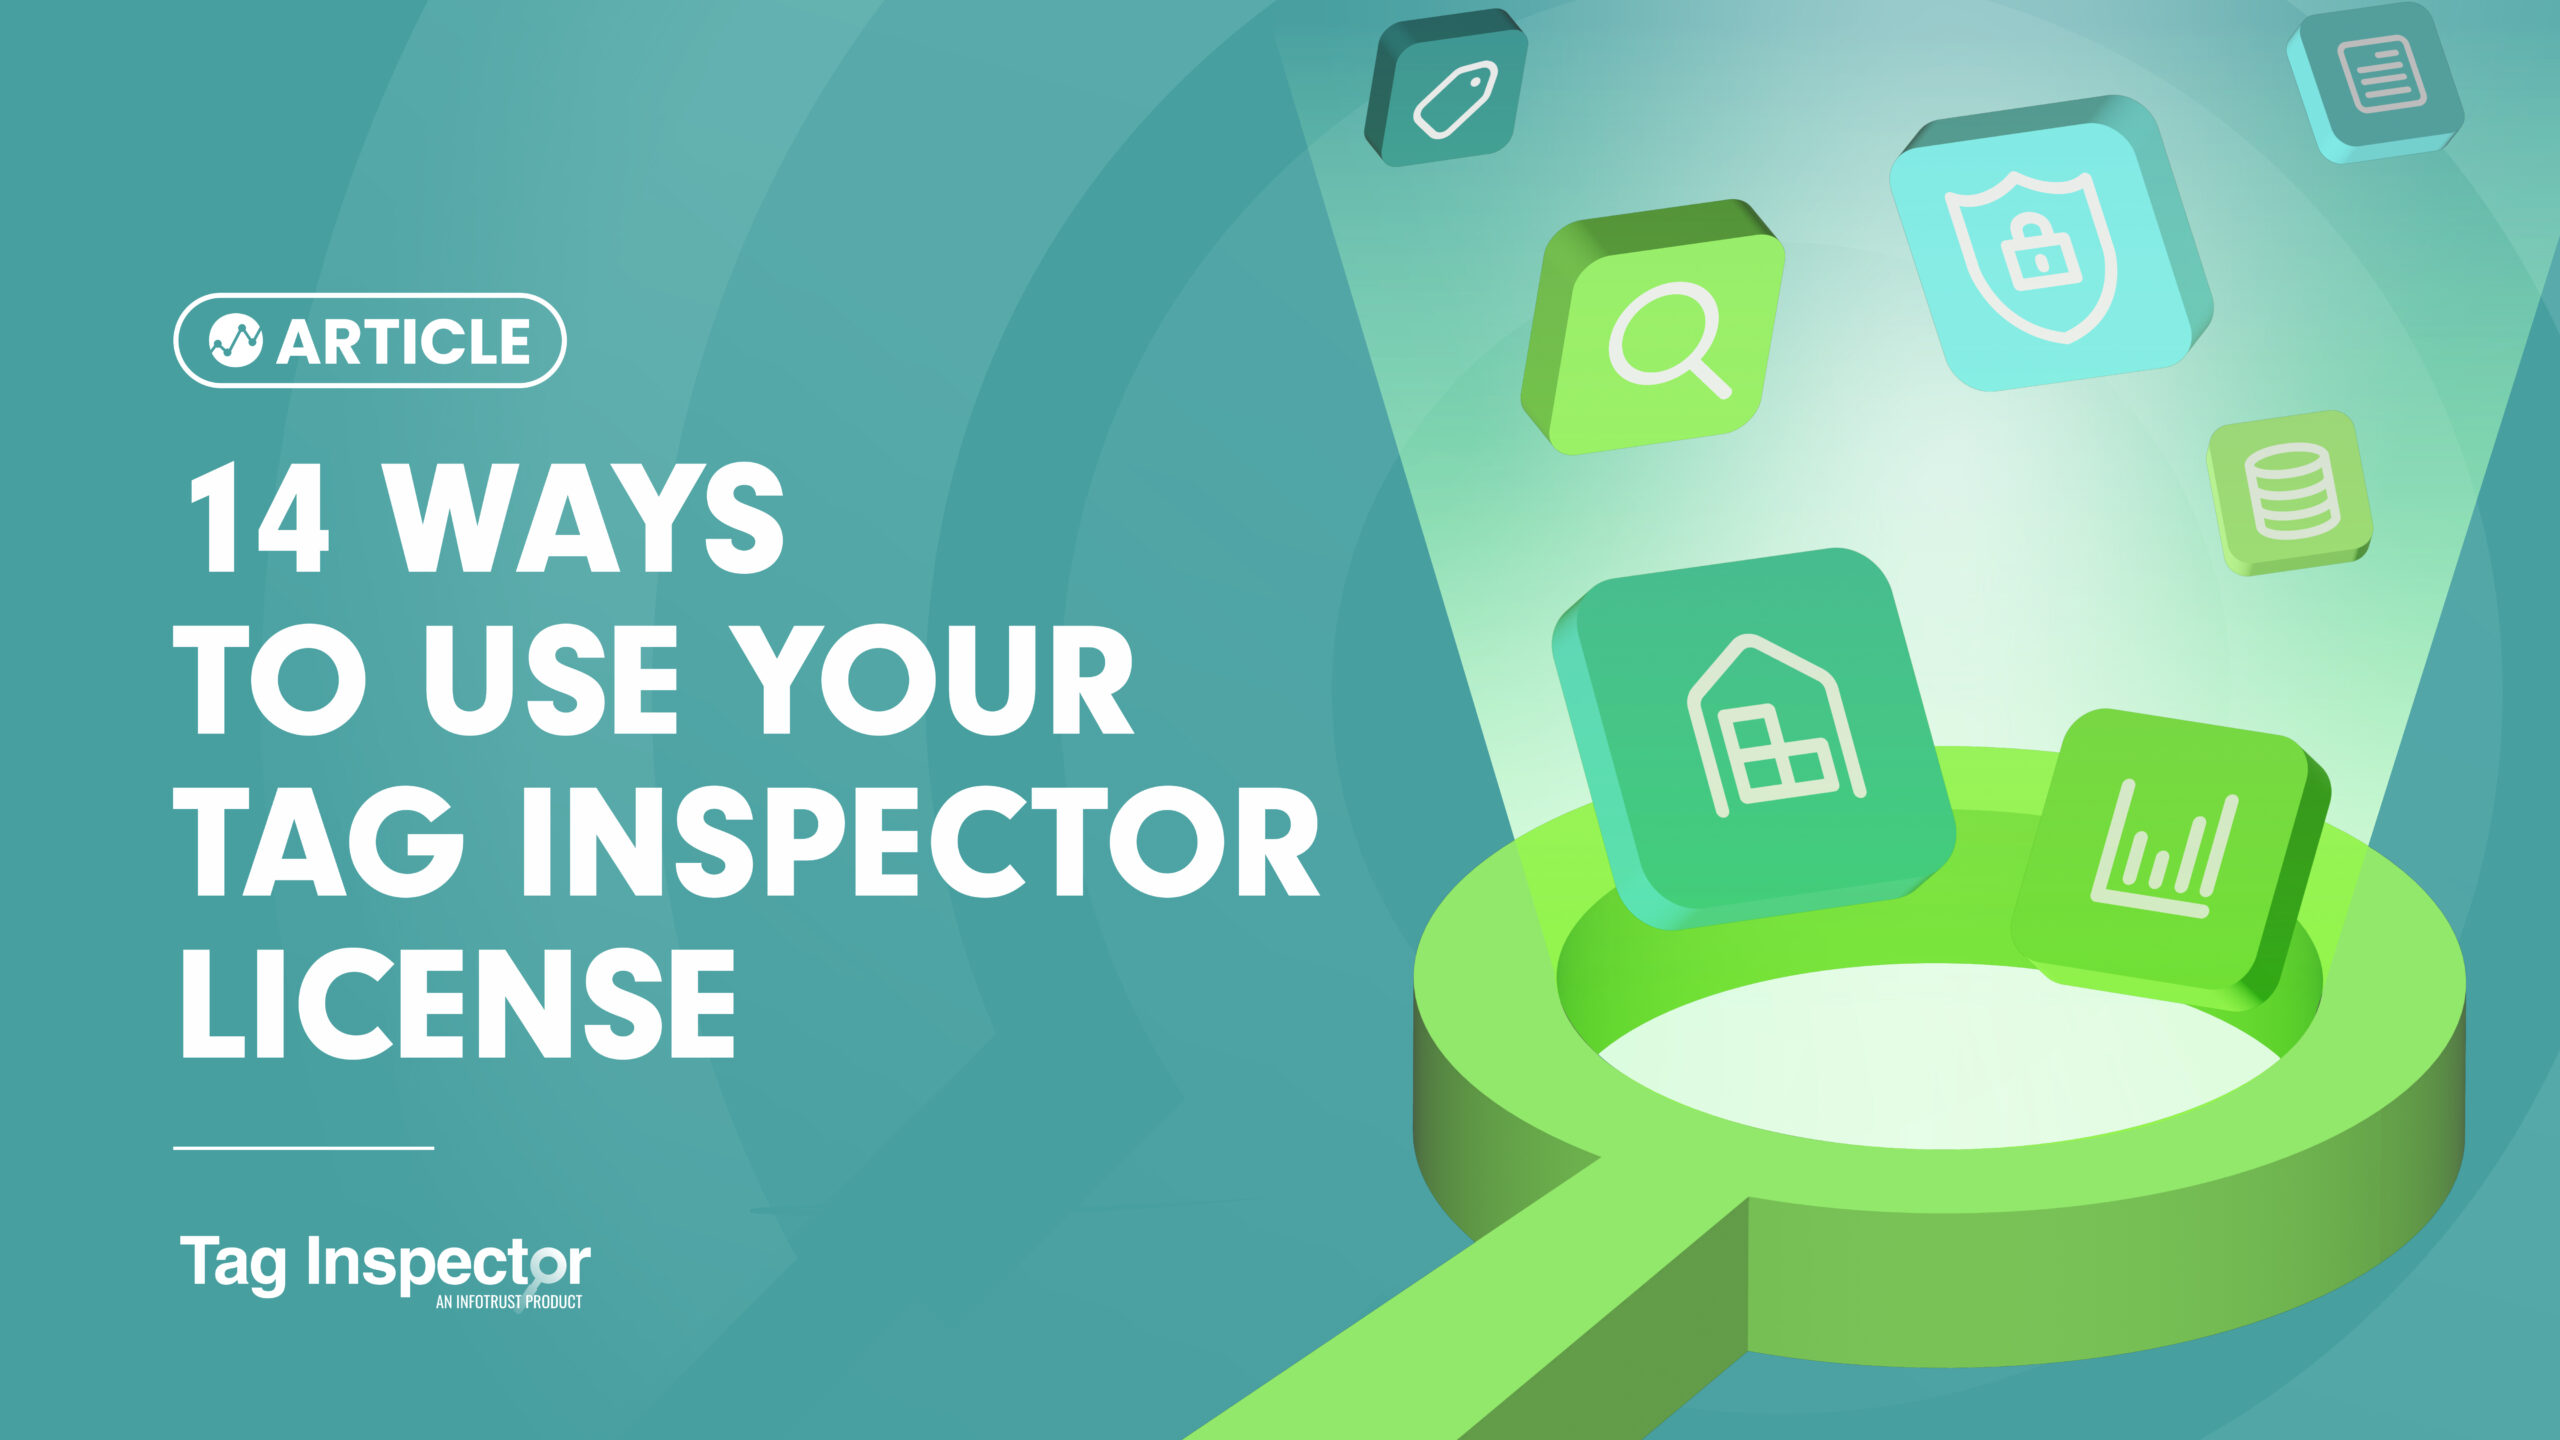 14 Ways Enterprise Organizations Use Tag Inspector to Save Millions